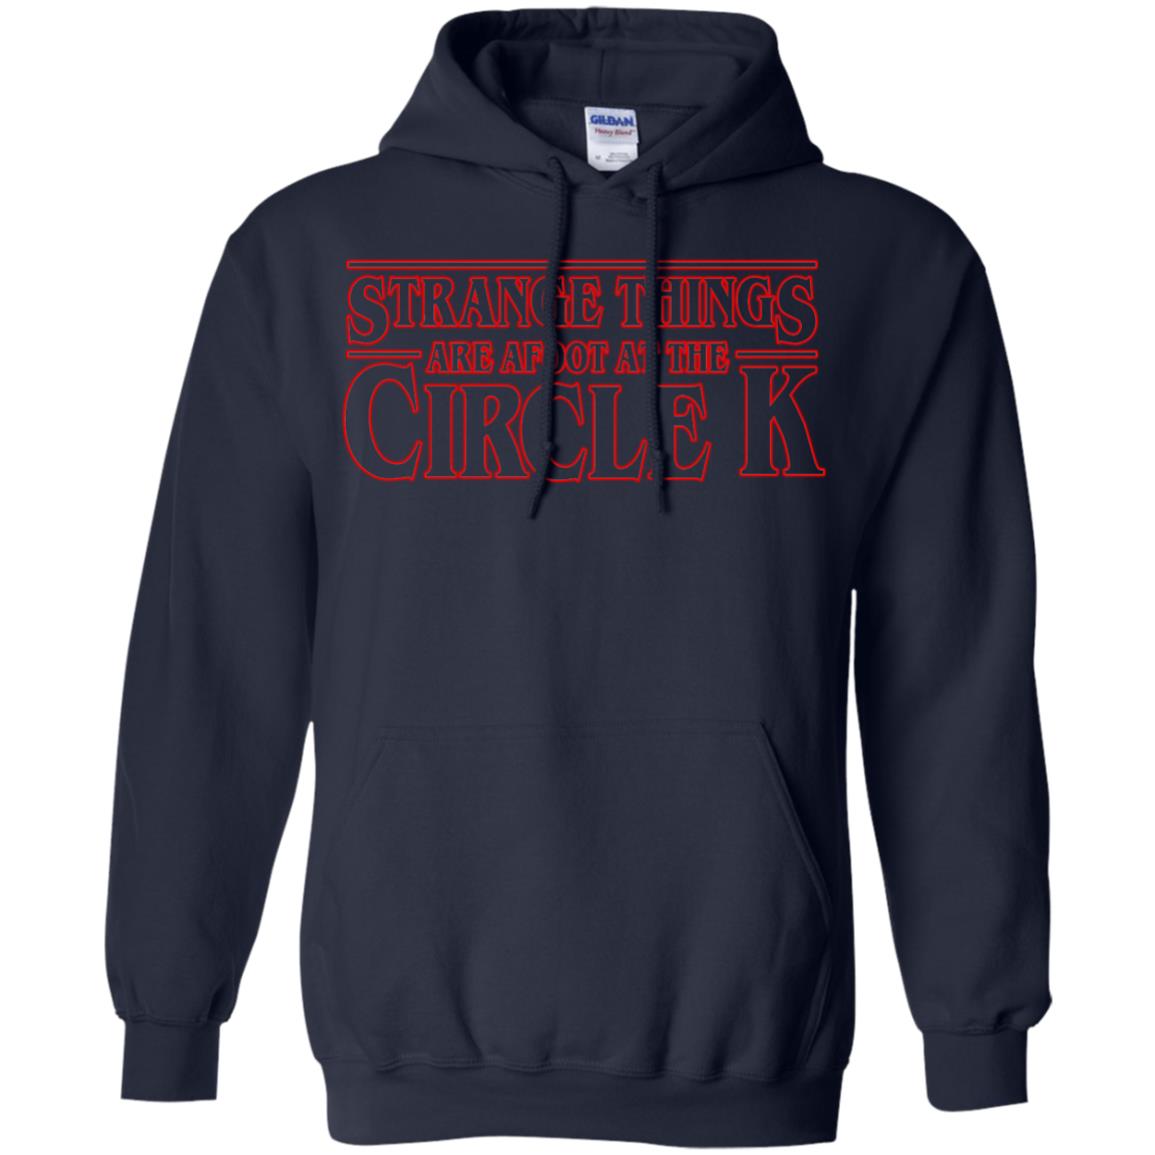 strange things are afoot at the circle k hoodie - navy blue.